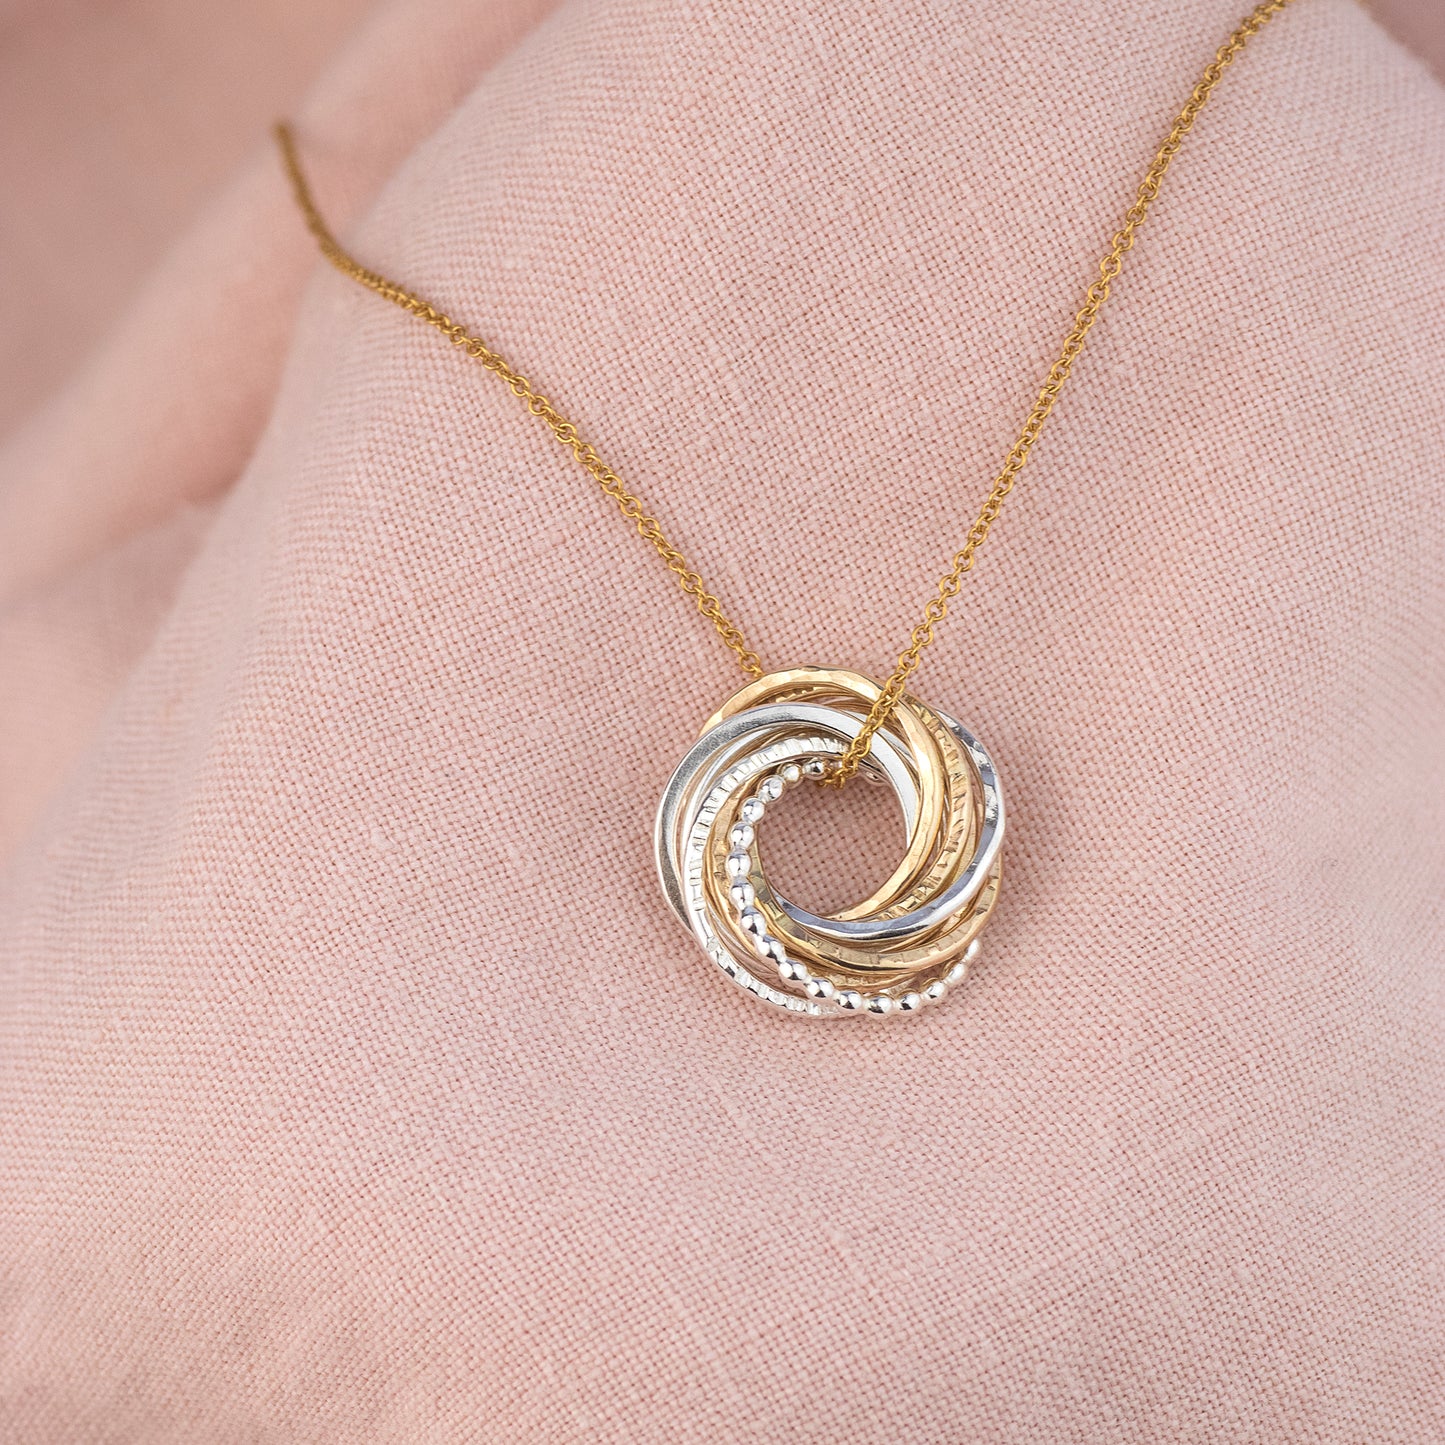 10th Anniversary Necklace - The Original 10 Rings for 10 Years Necklace -  Petite Silver & Gold